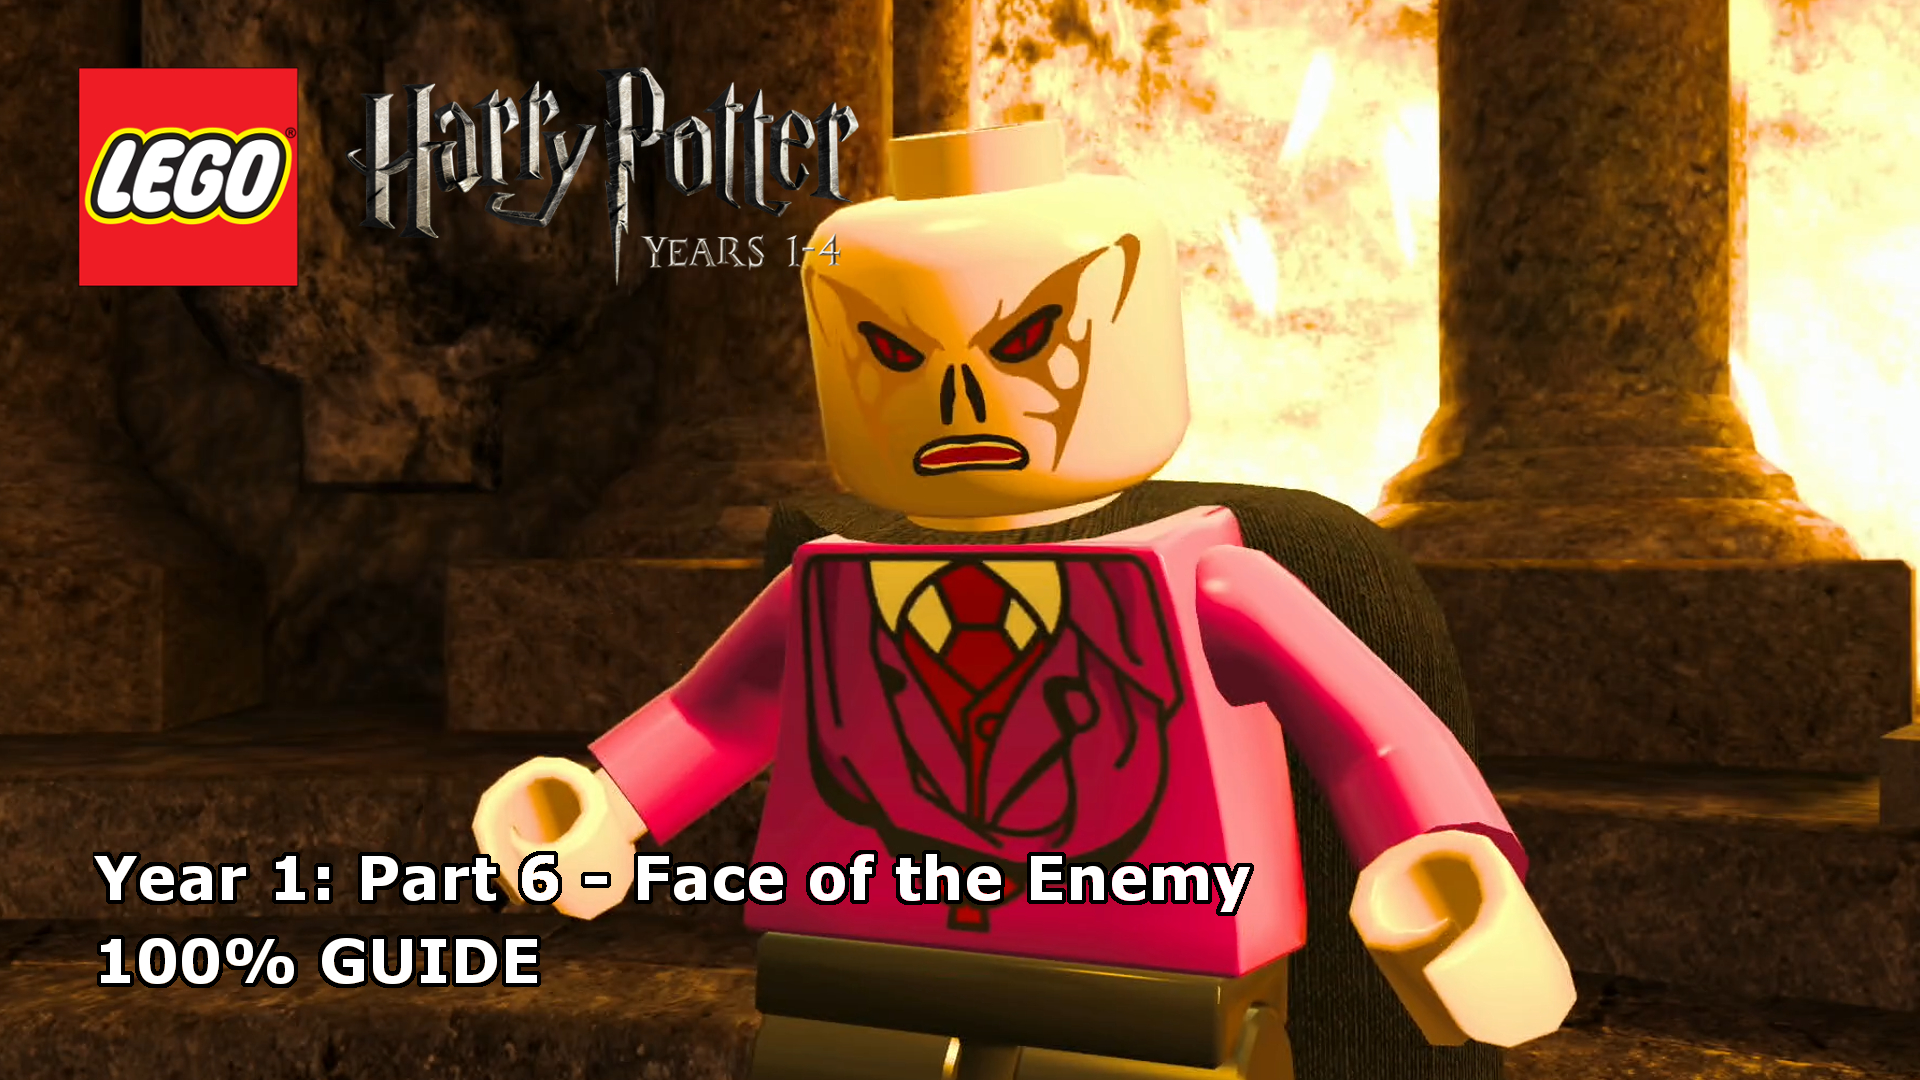 LEGO Harry Potter Years 1-4 Walkthrough Part 1 - Year 1 - 'The